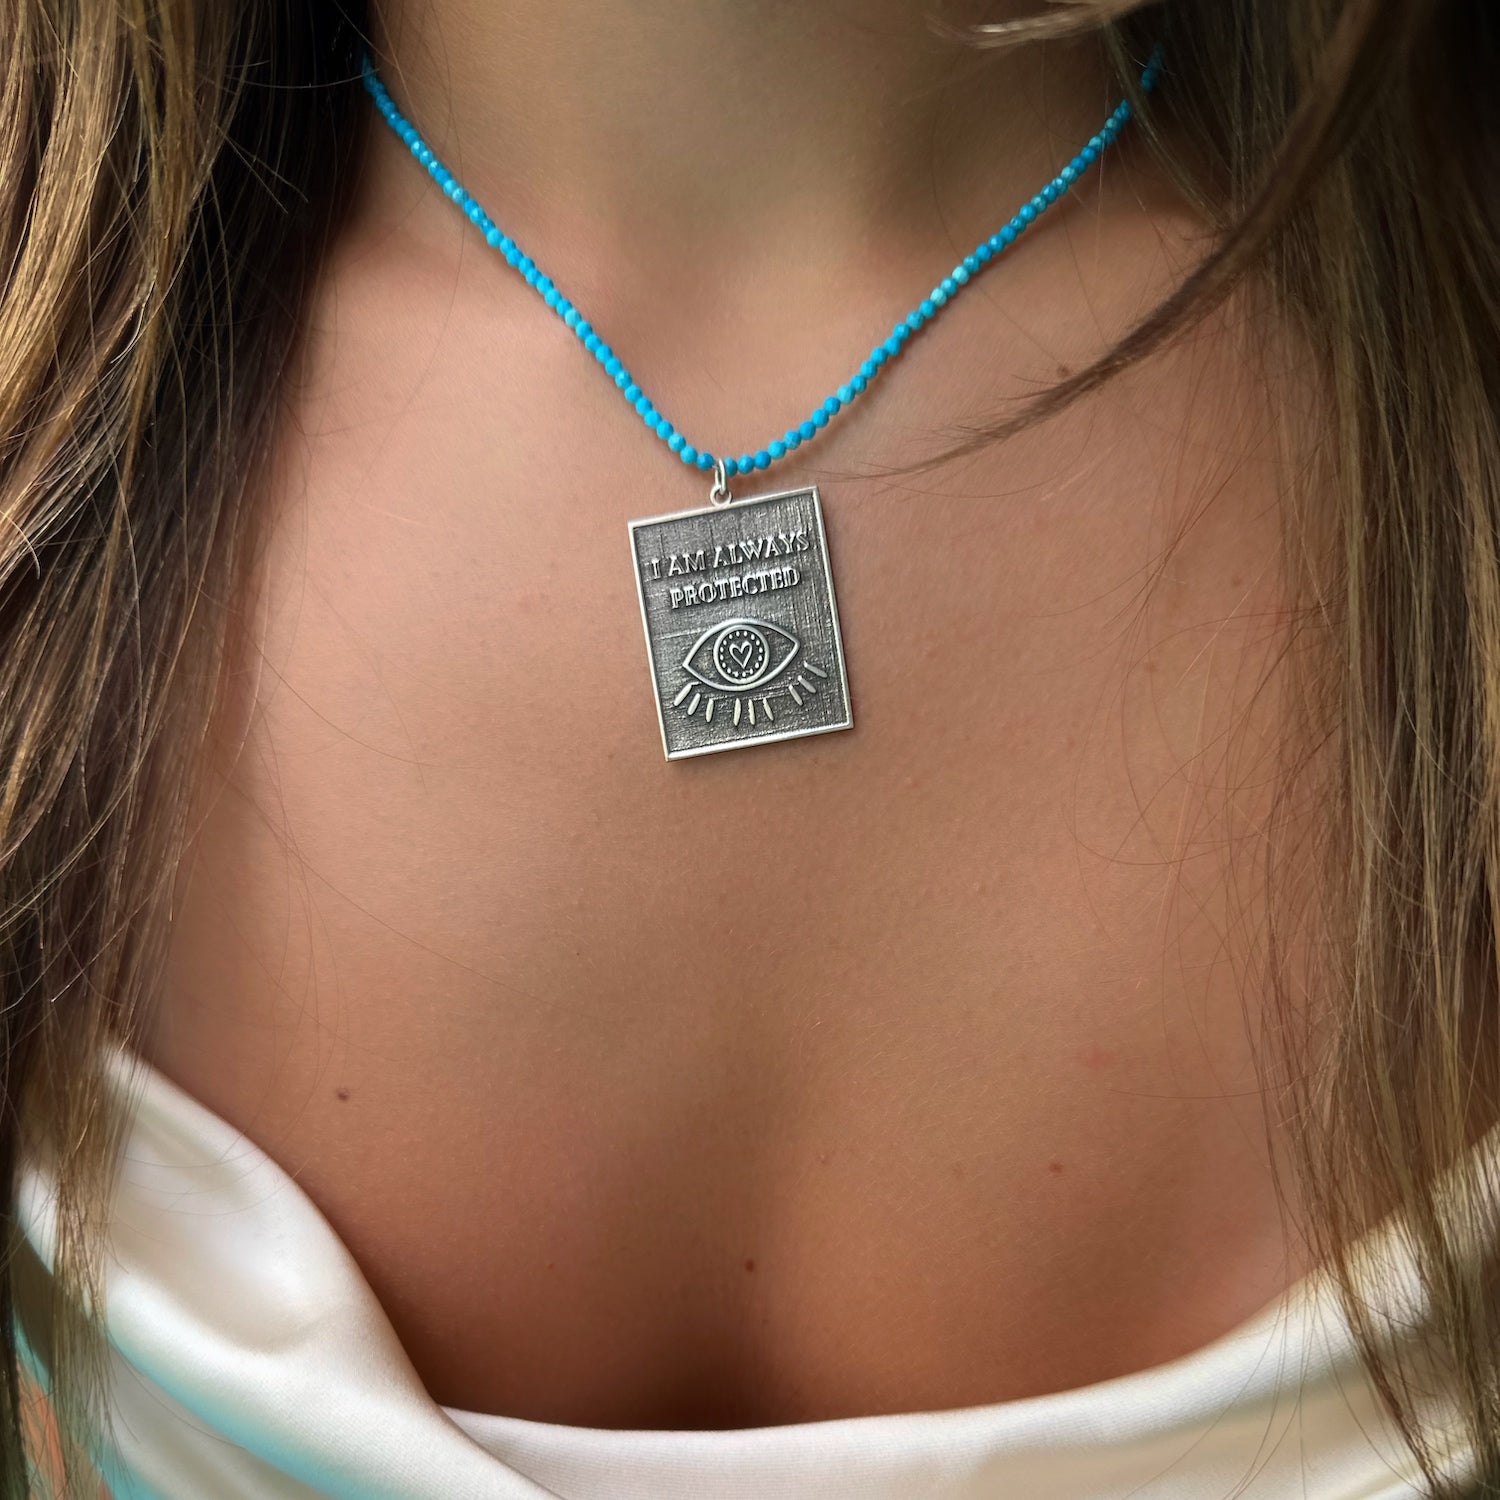 A model confidently wearing the Turquoise 'I Am Always Protected' Necklace, embodying inner strength